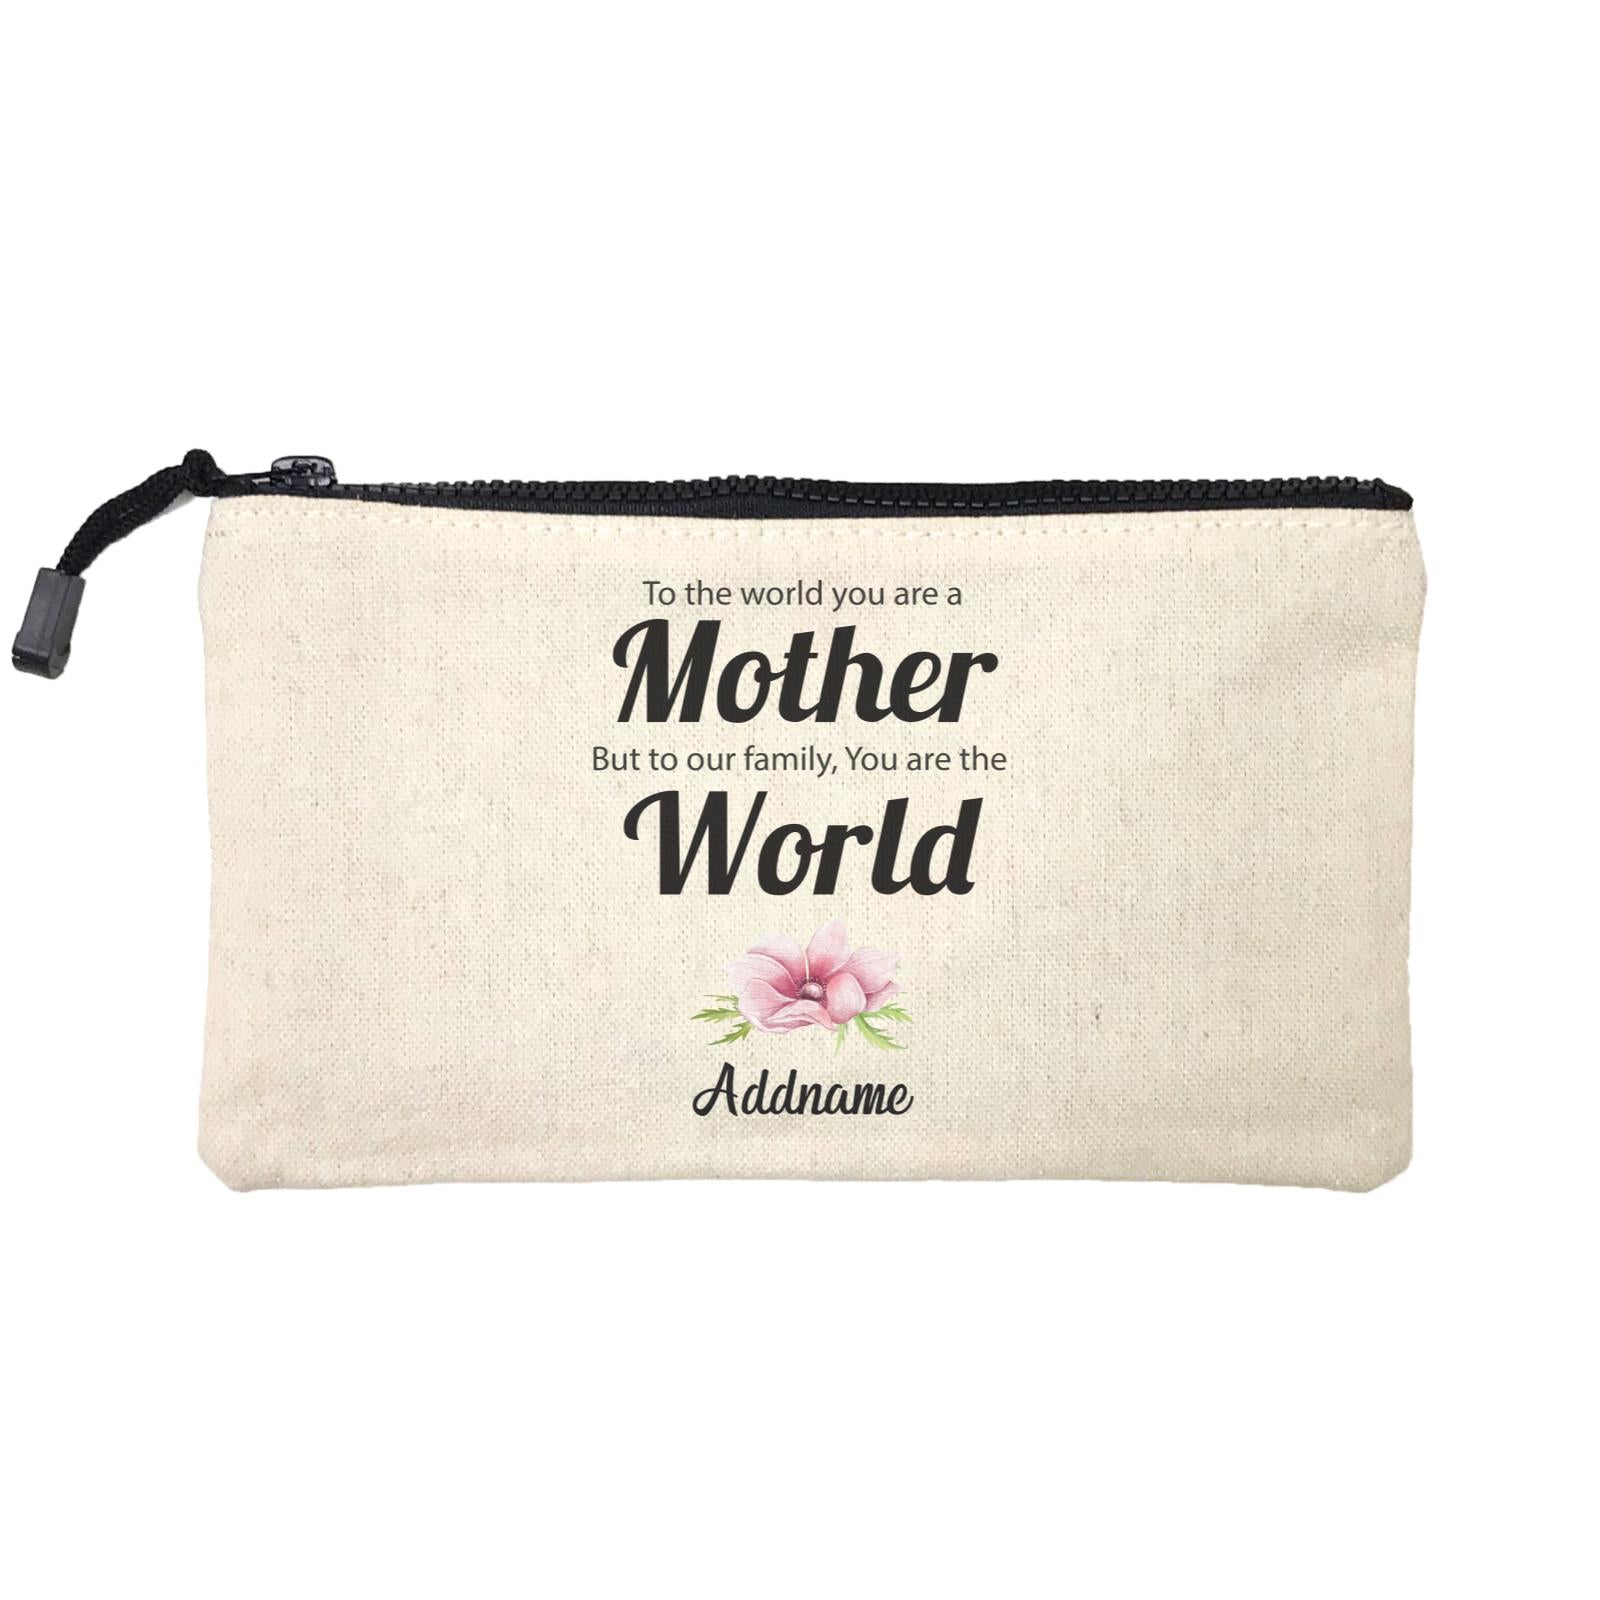 Sweet Mom Quotes 1 To The World You Are A Mother But To Our Family, You Are The World Addname Mini Accessories Stationery Pouch